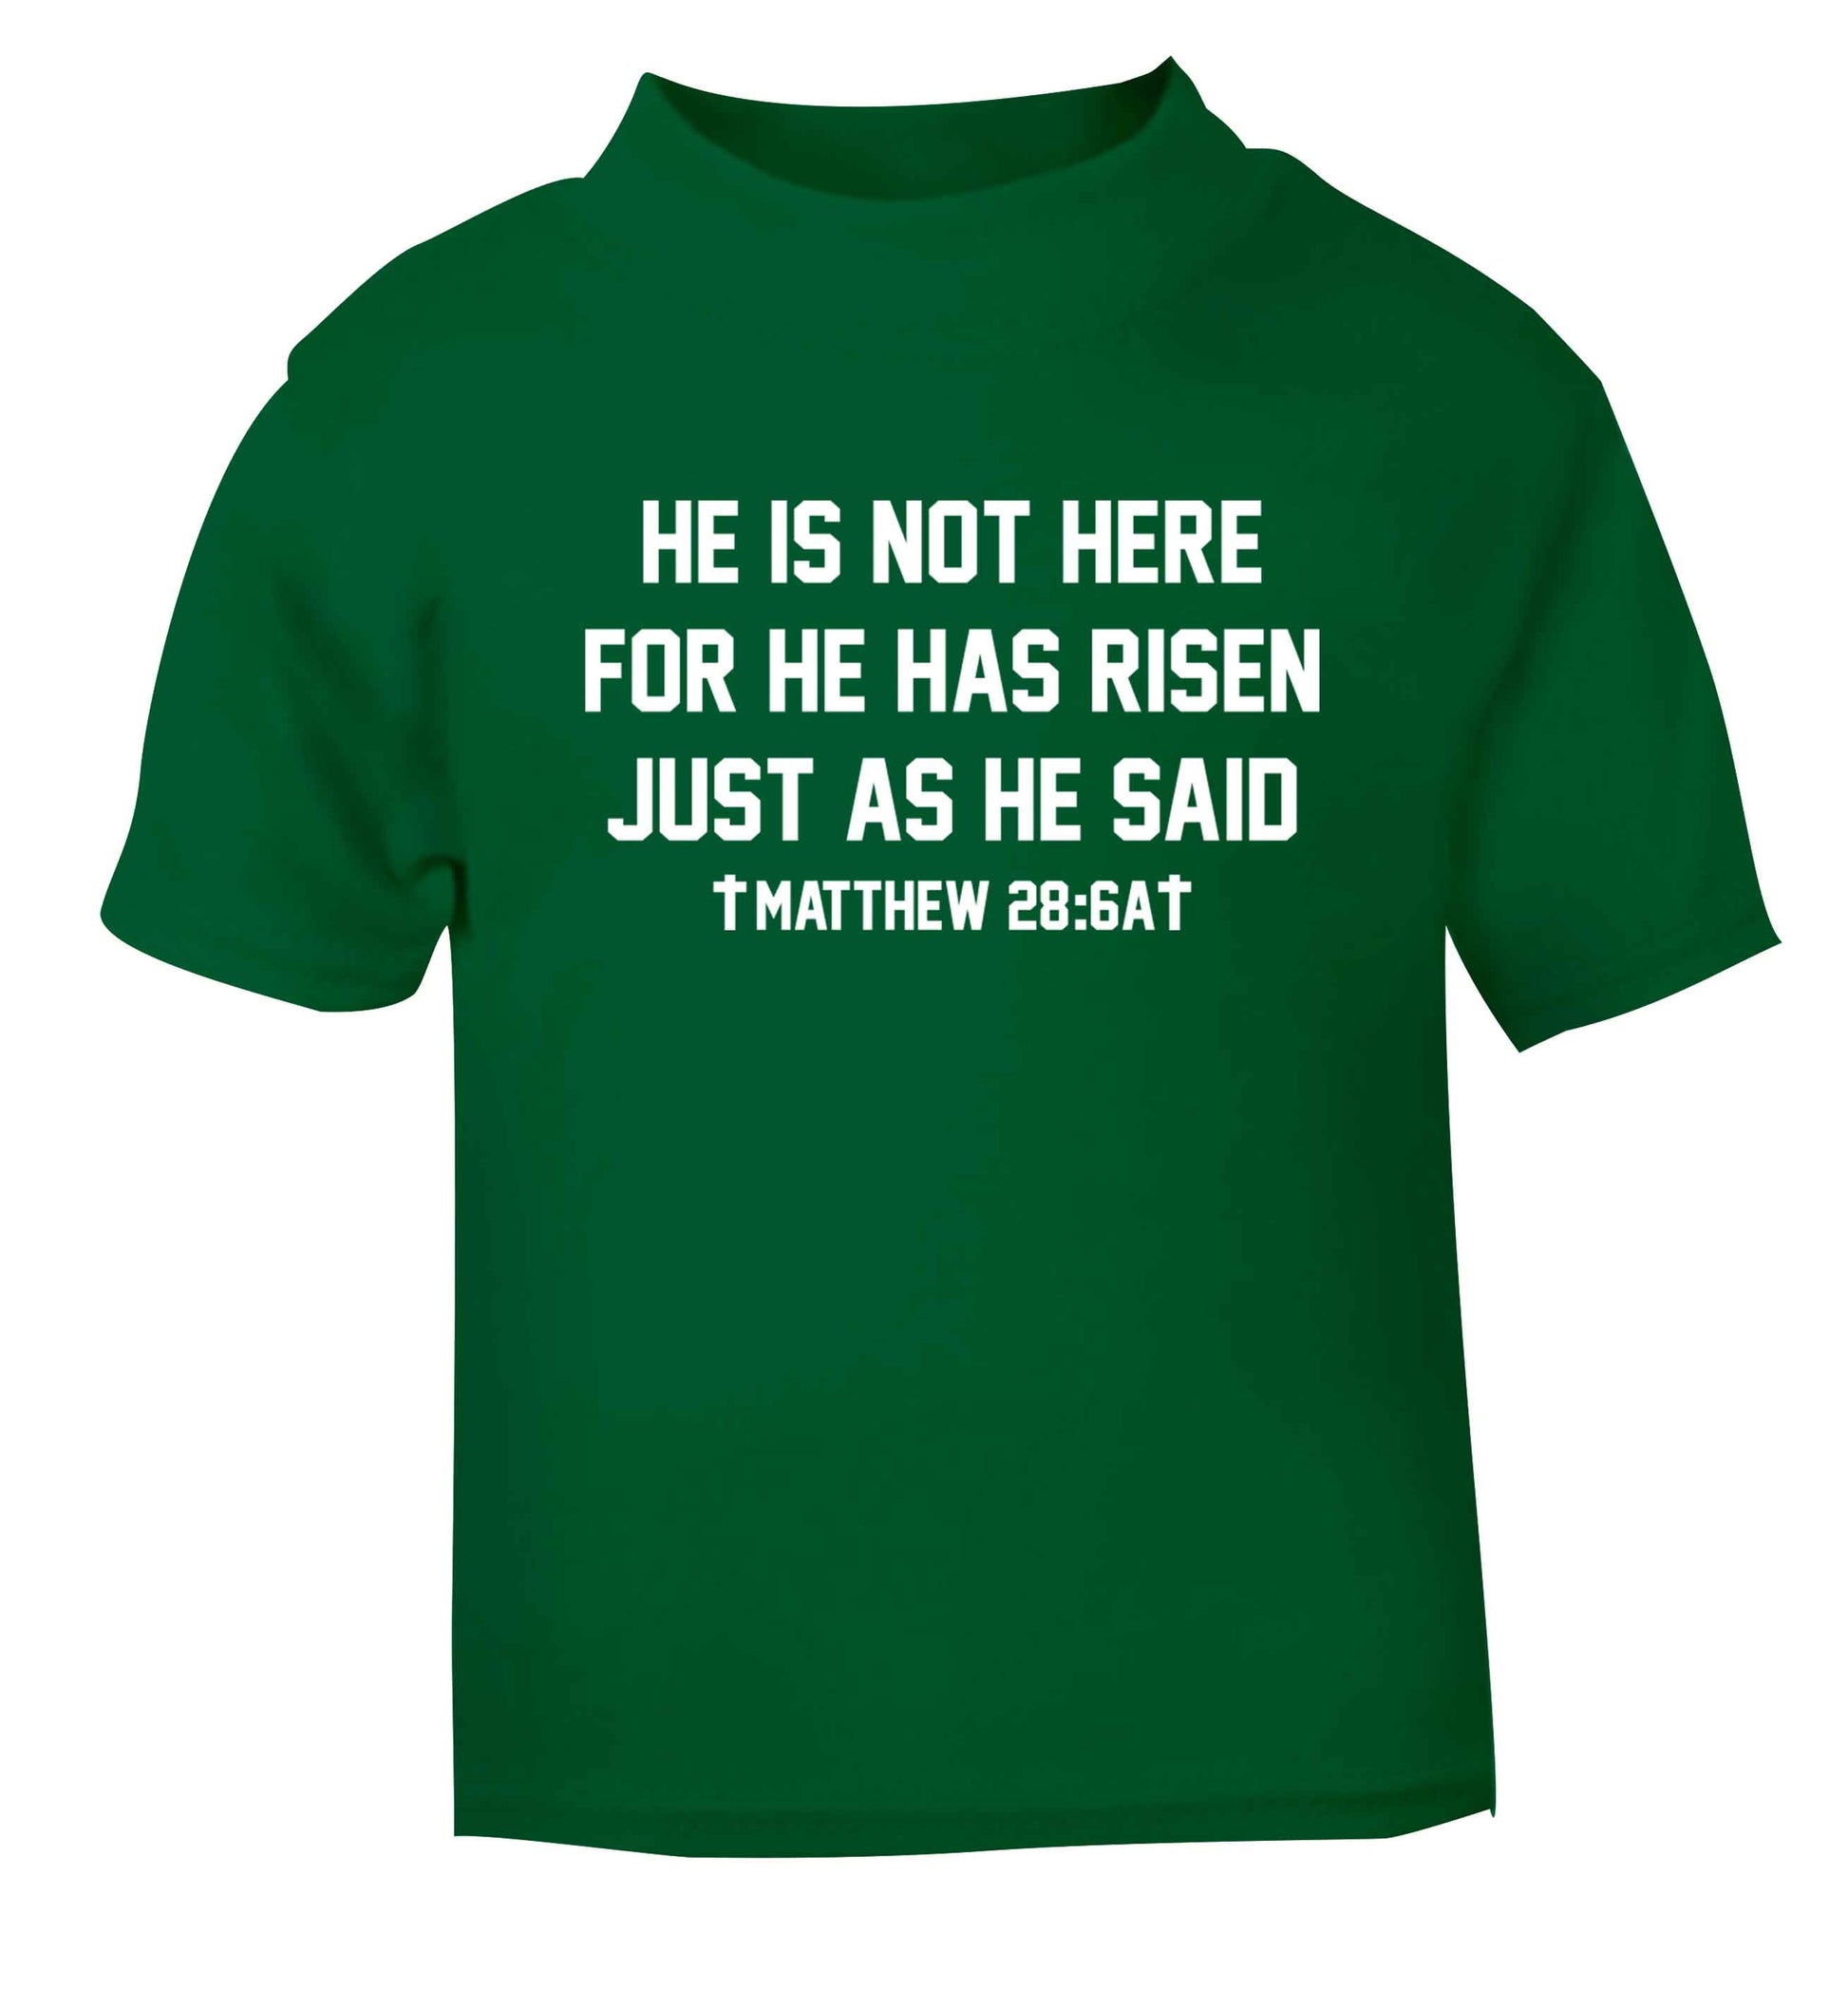 He is not here for he has risen just as he said matthew 28:6A green baby toddler Tshirt 2 Years